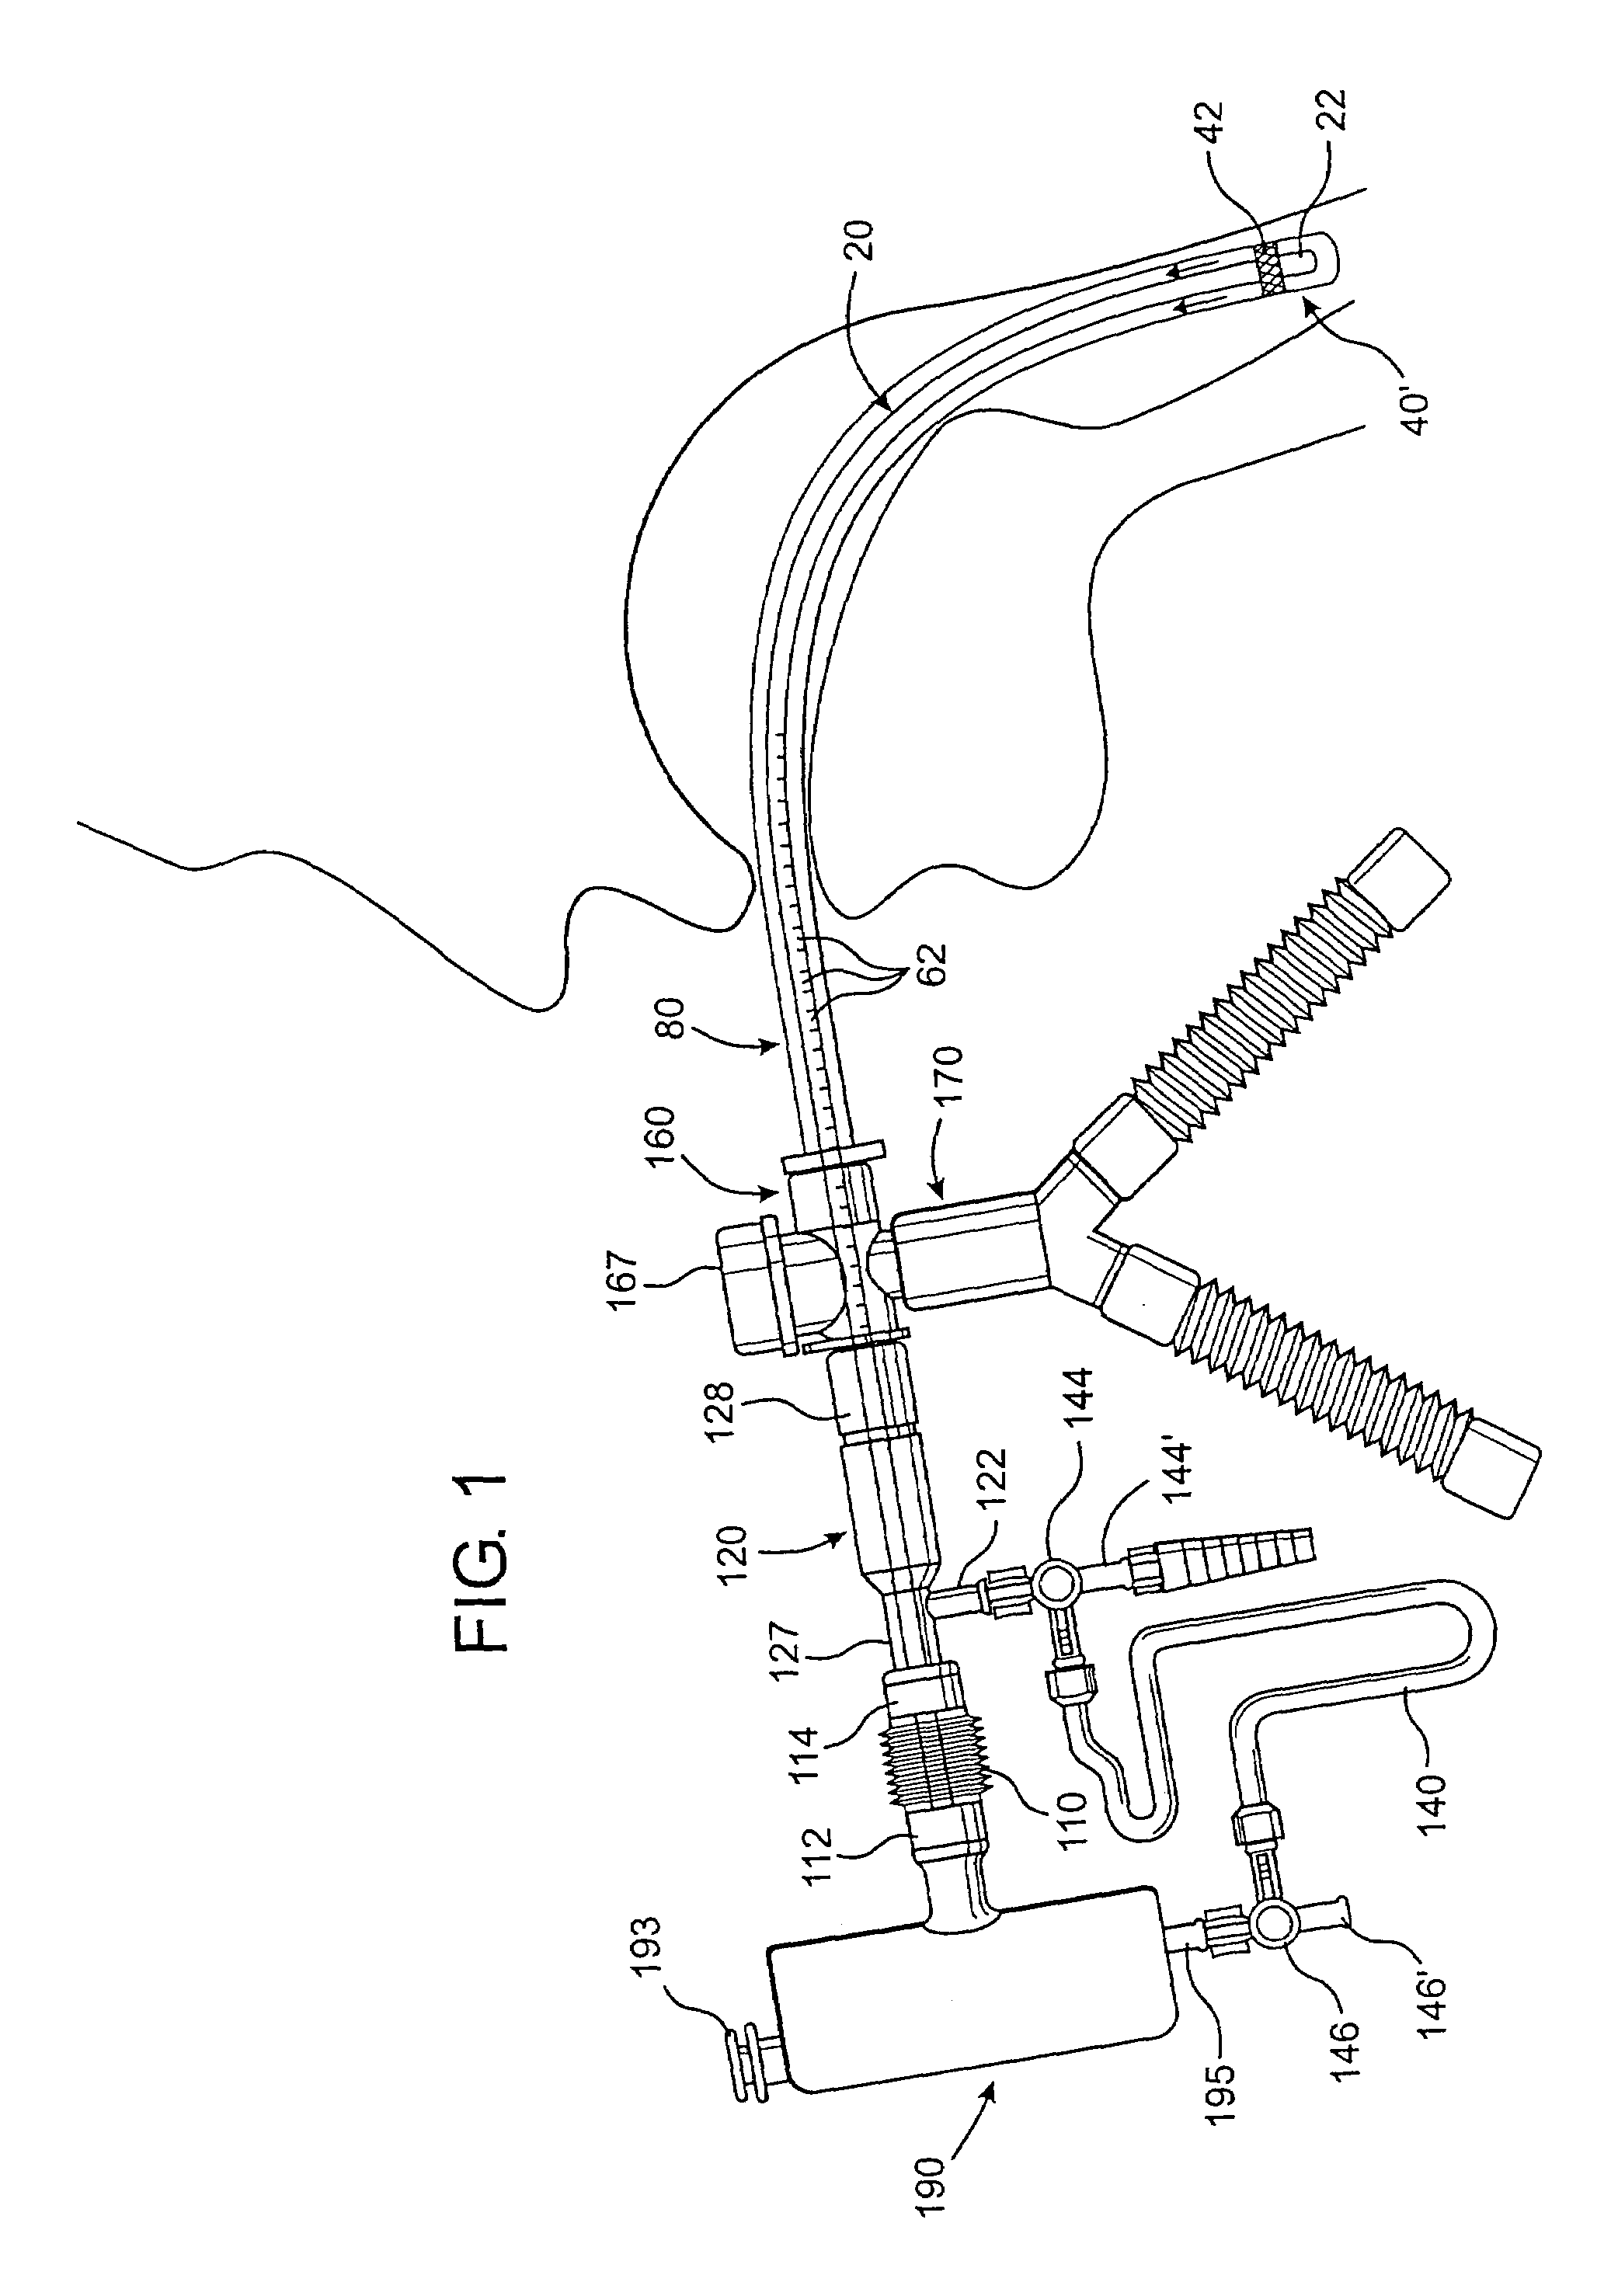 Endotracheal tube cleaning apparatus and method